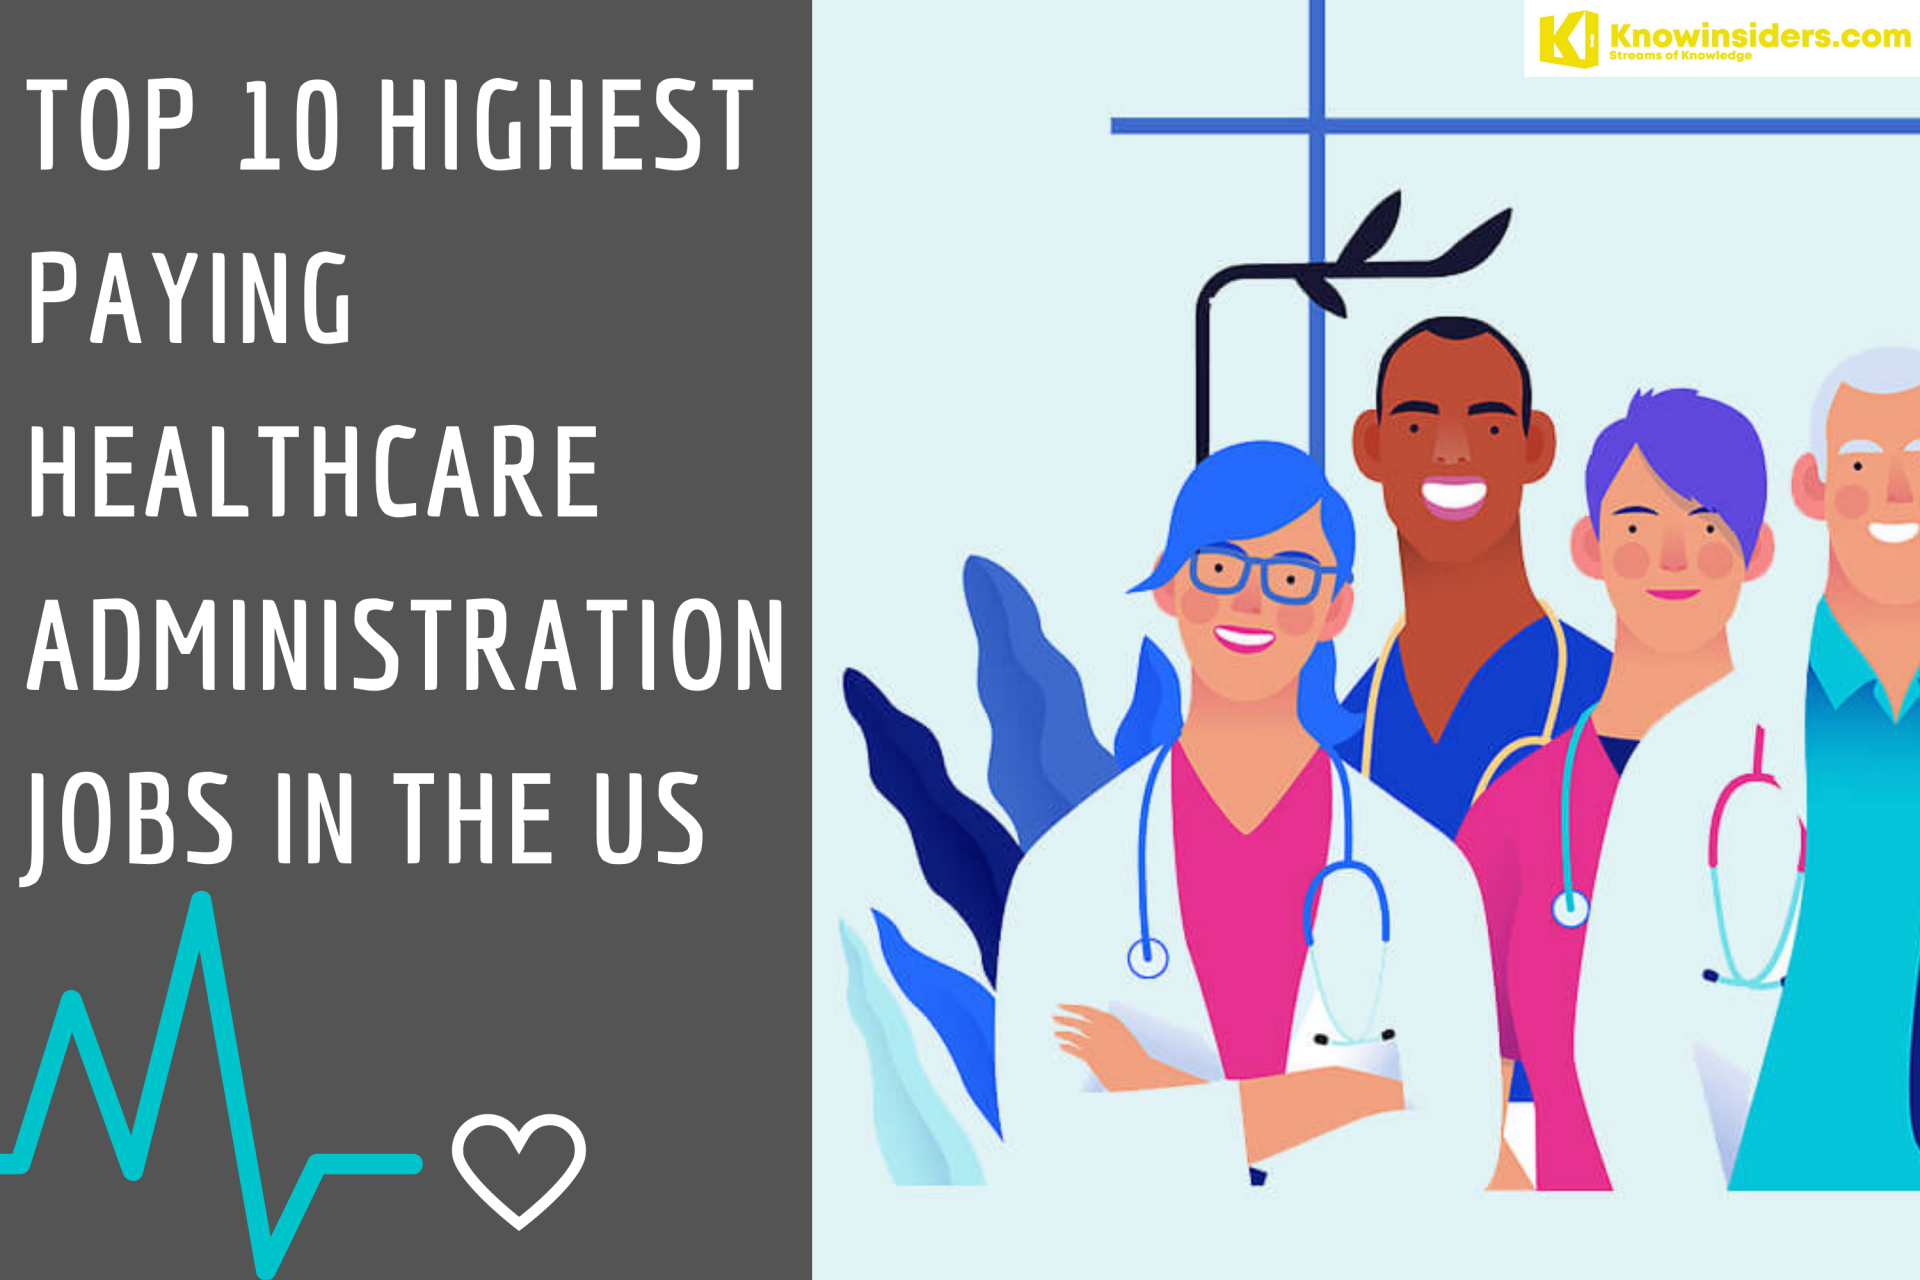 Top 10 Highest Paying Healthcare Administration Jobs In The US